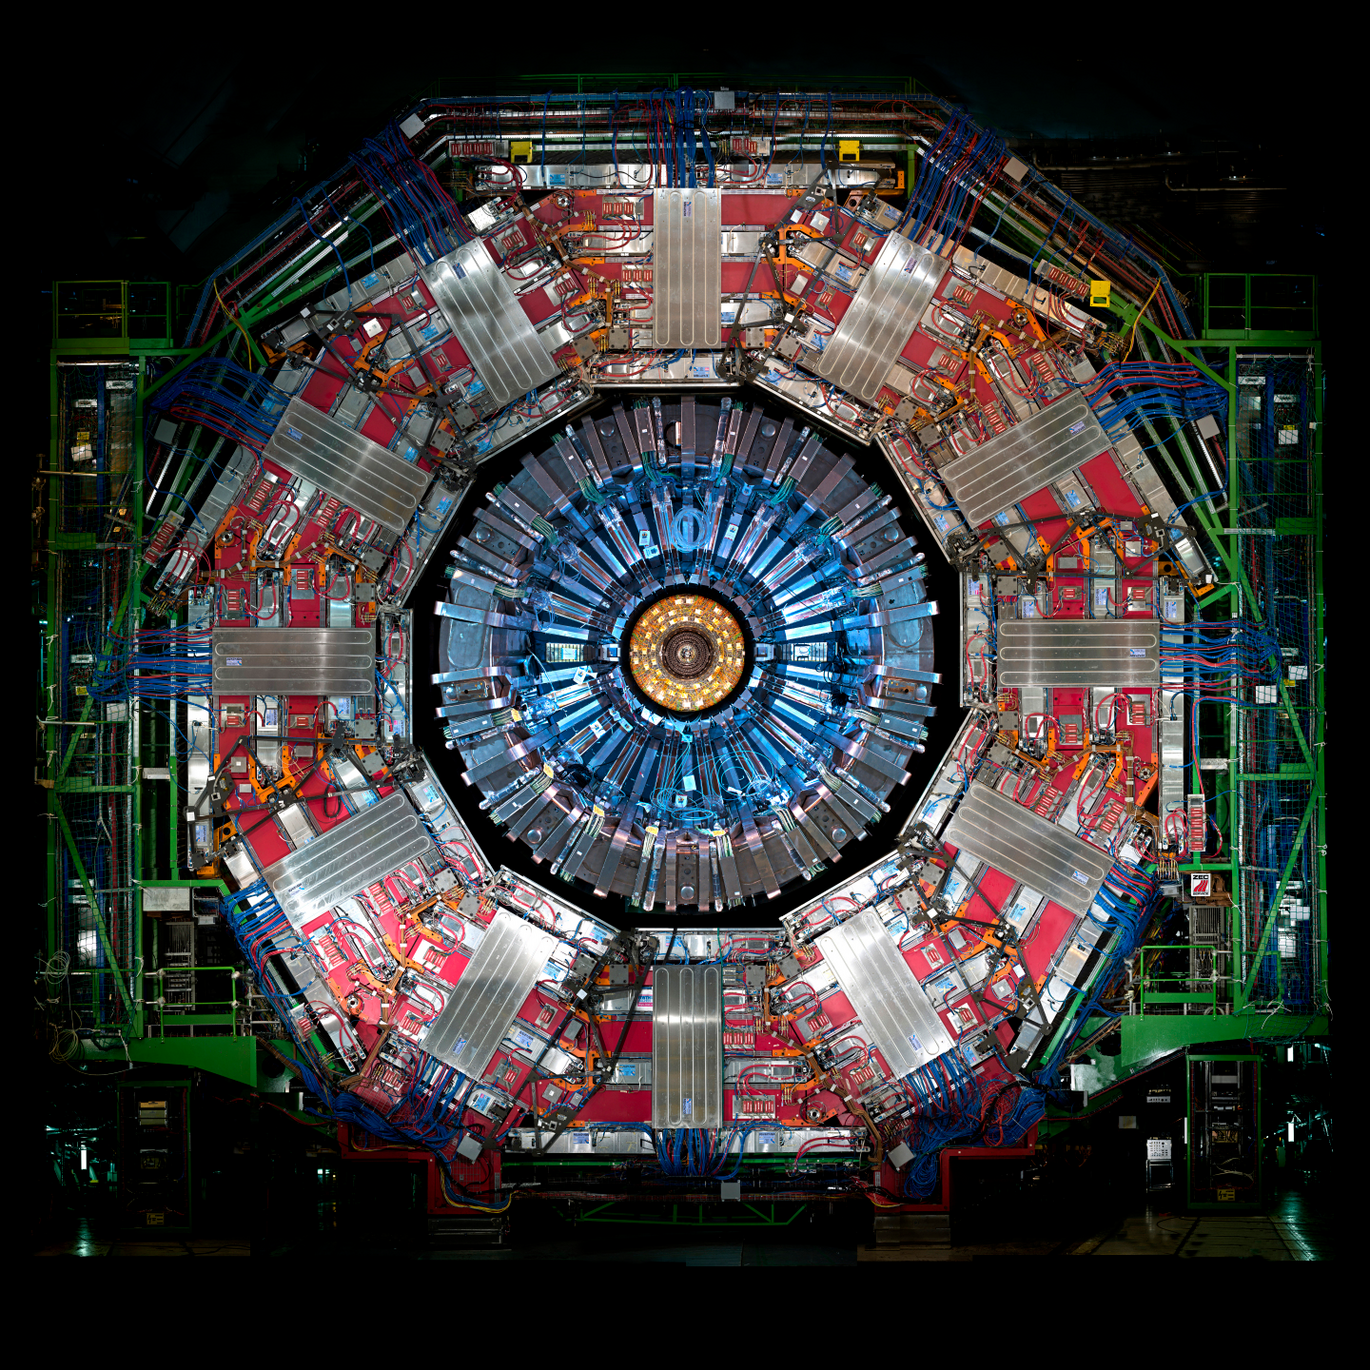 At CERN sicentists are working hard to expand our understanding of the universe and thus add to the standard model